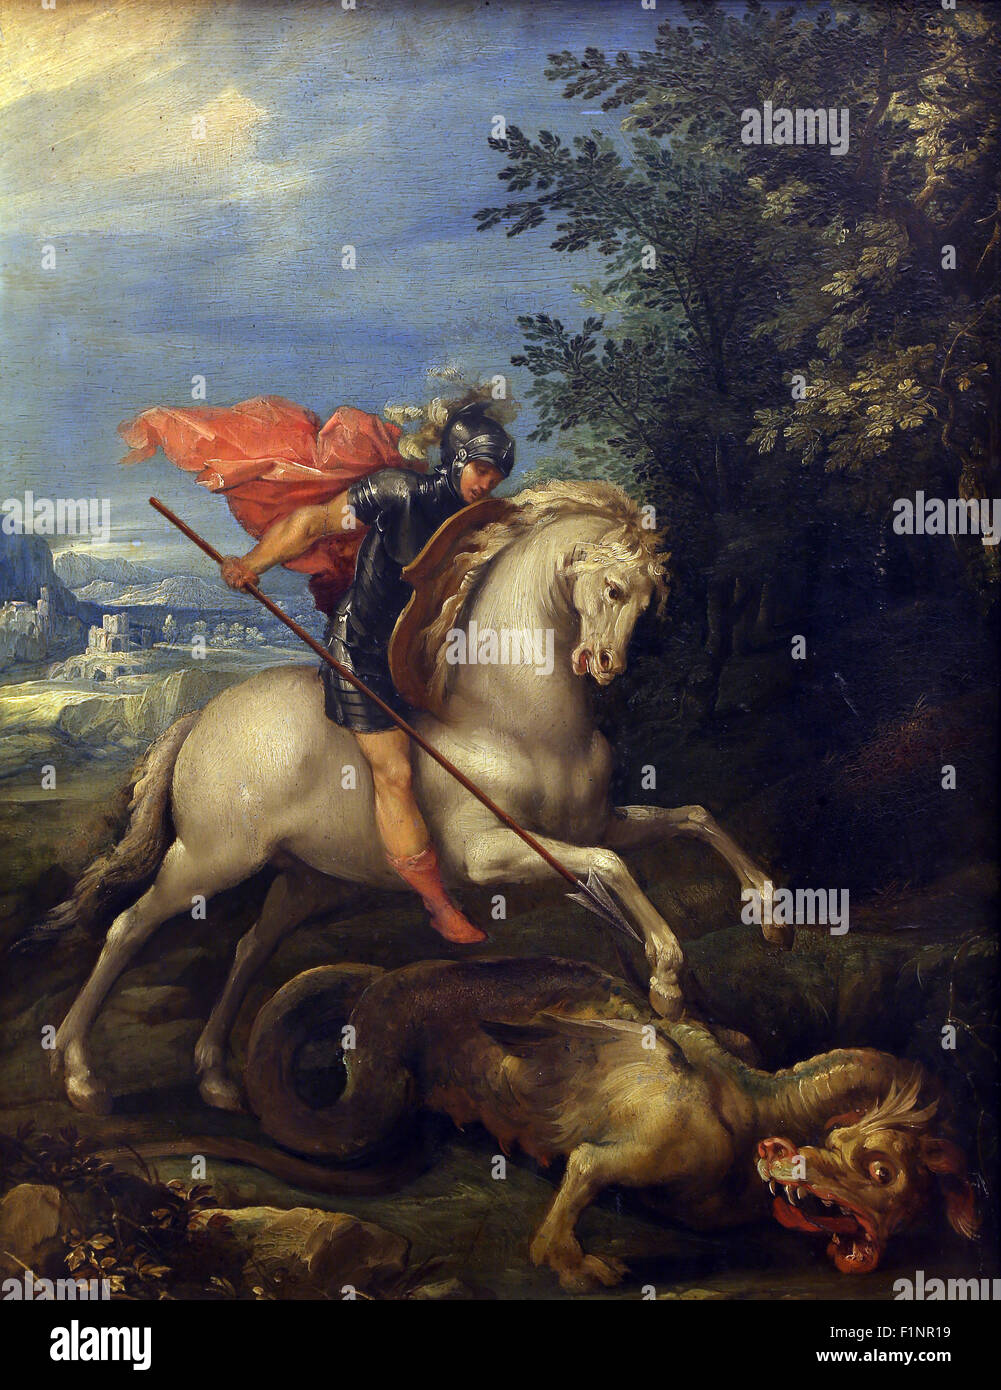 Giuseppe Cesari (Cavaliere d'Arpino): St. George slaying the dragon, Old Masters Collection, in Zagreb, Croatia Stock Photo